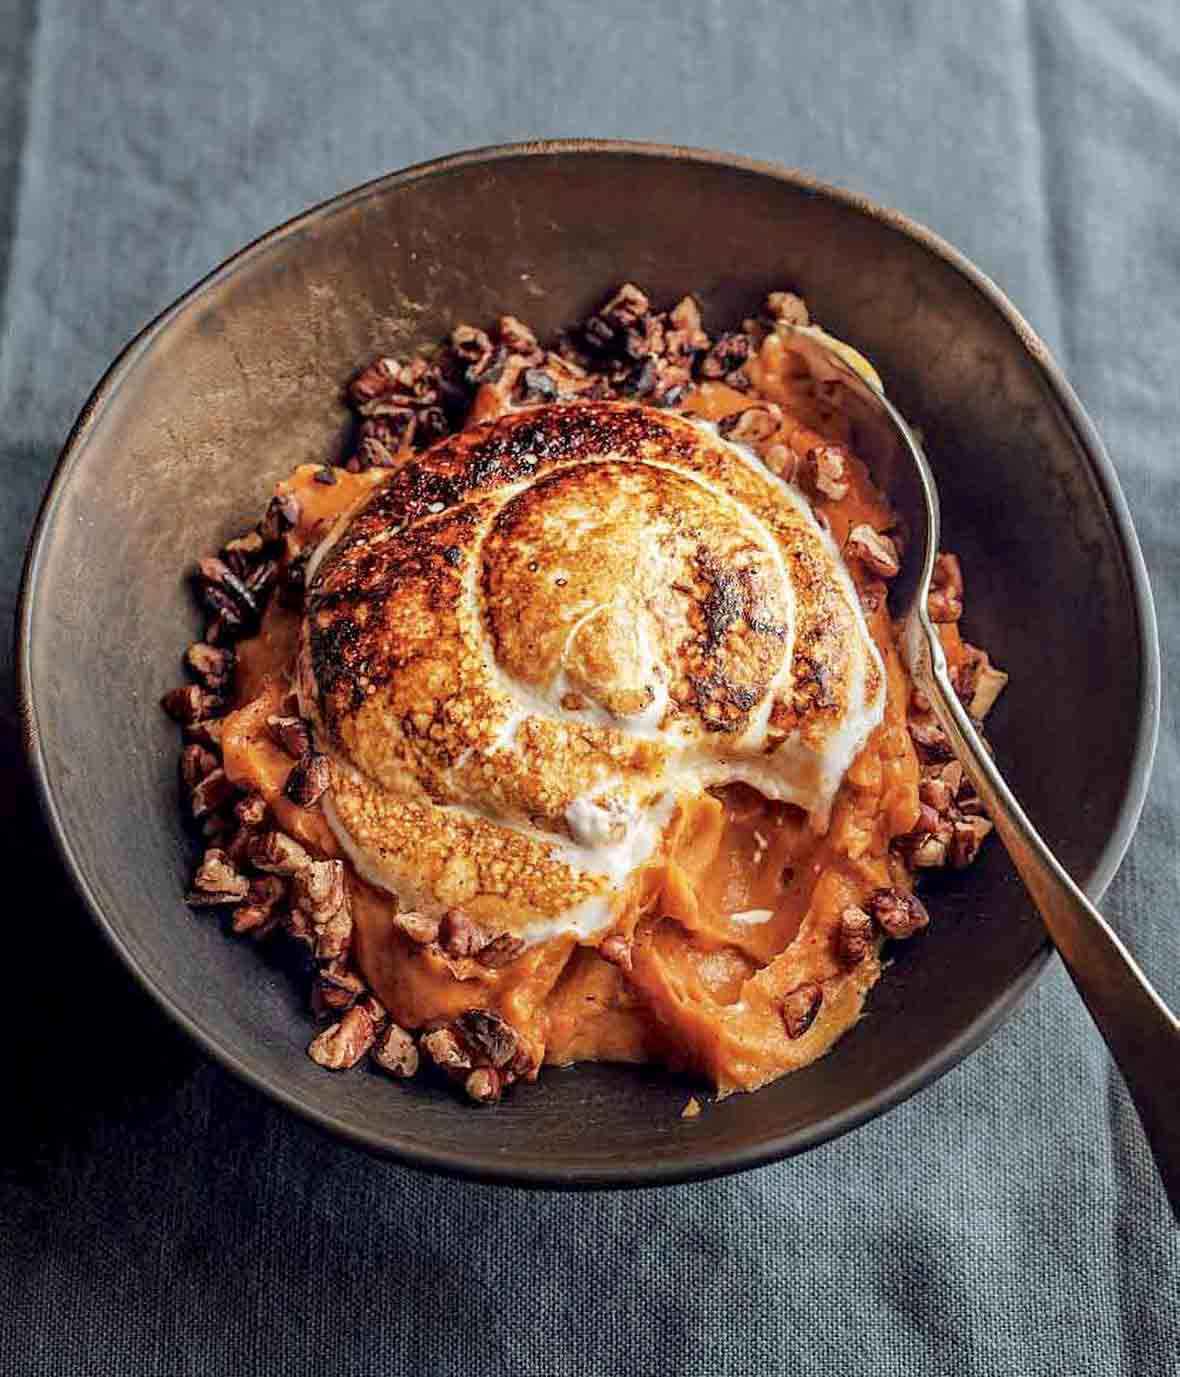 A bowl of sweet potato puree with marshmallow, which is toasted with a torch, toasted buttered pecans around the edge